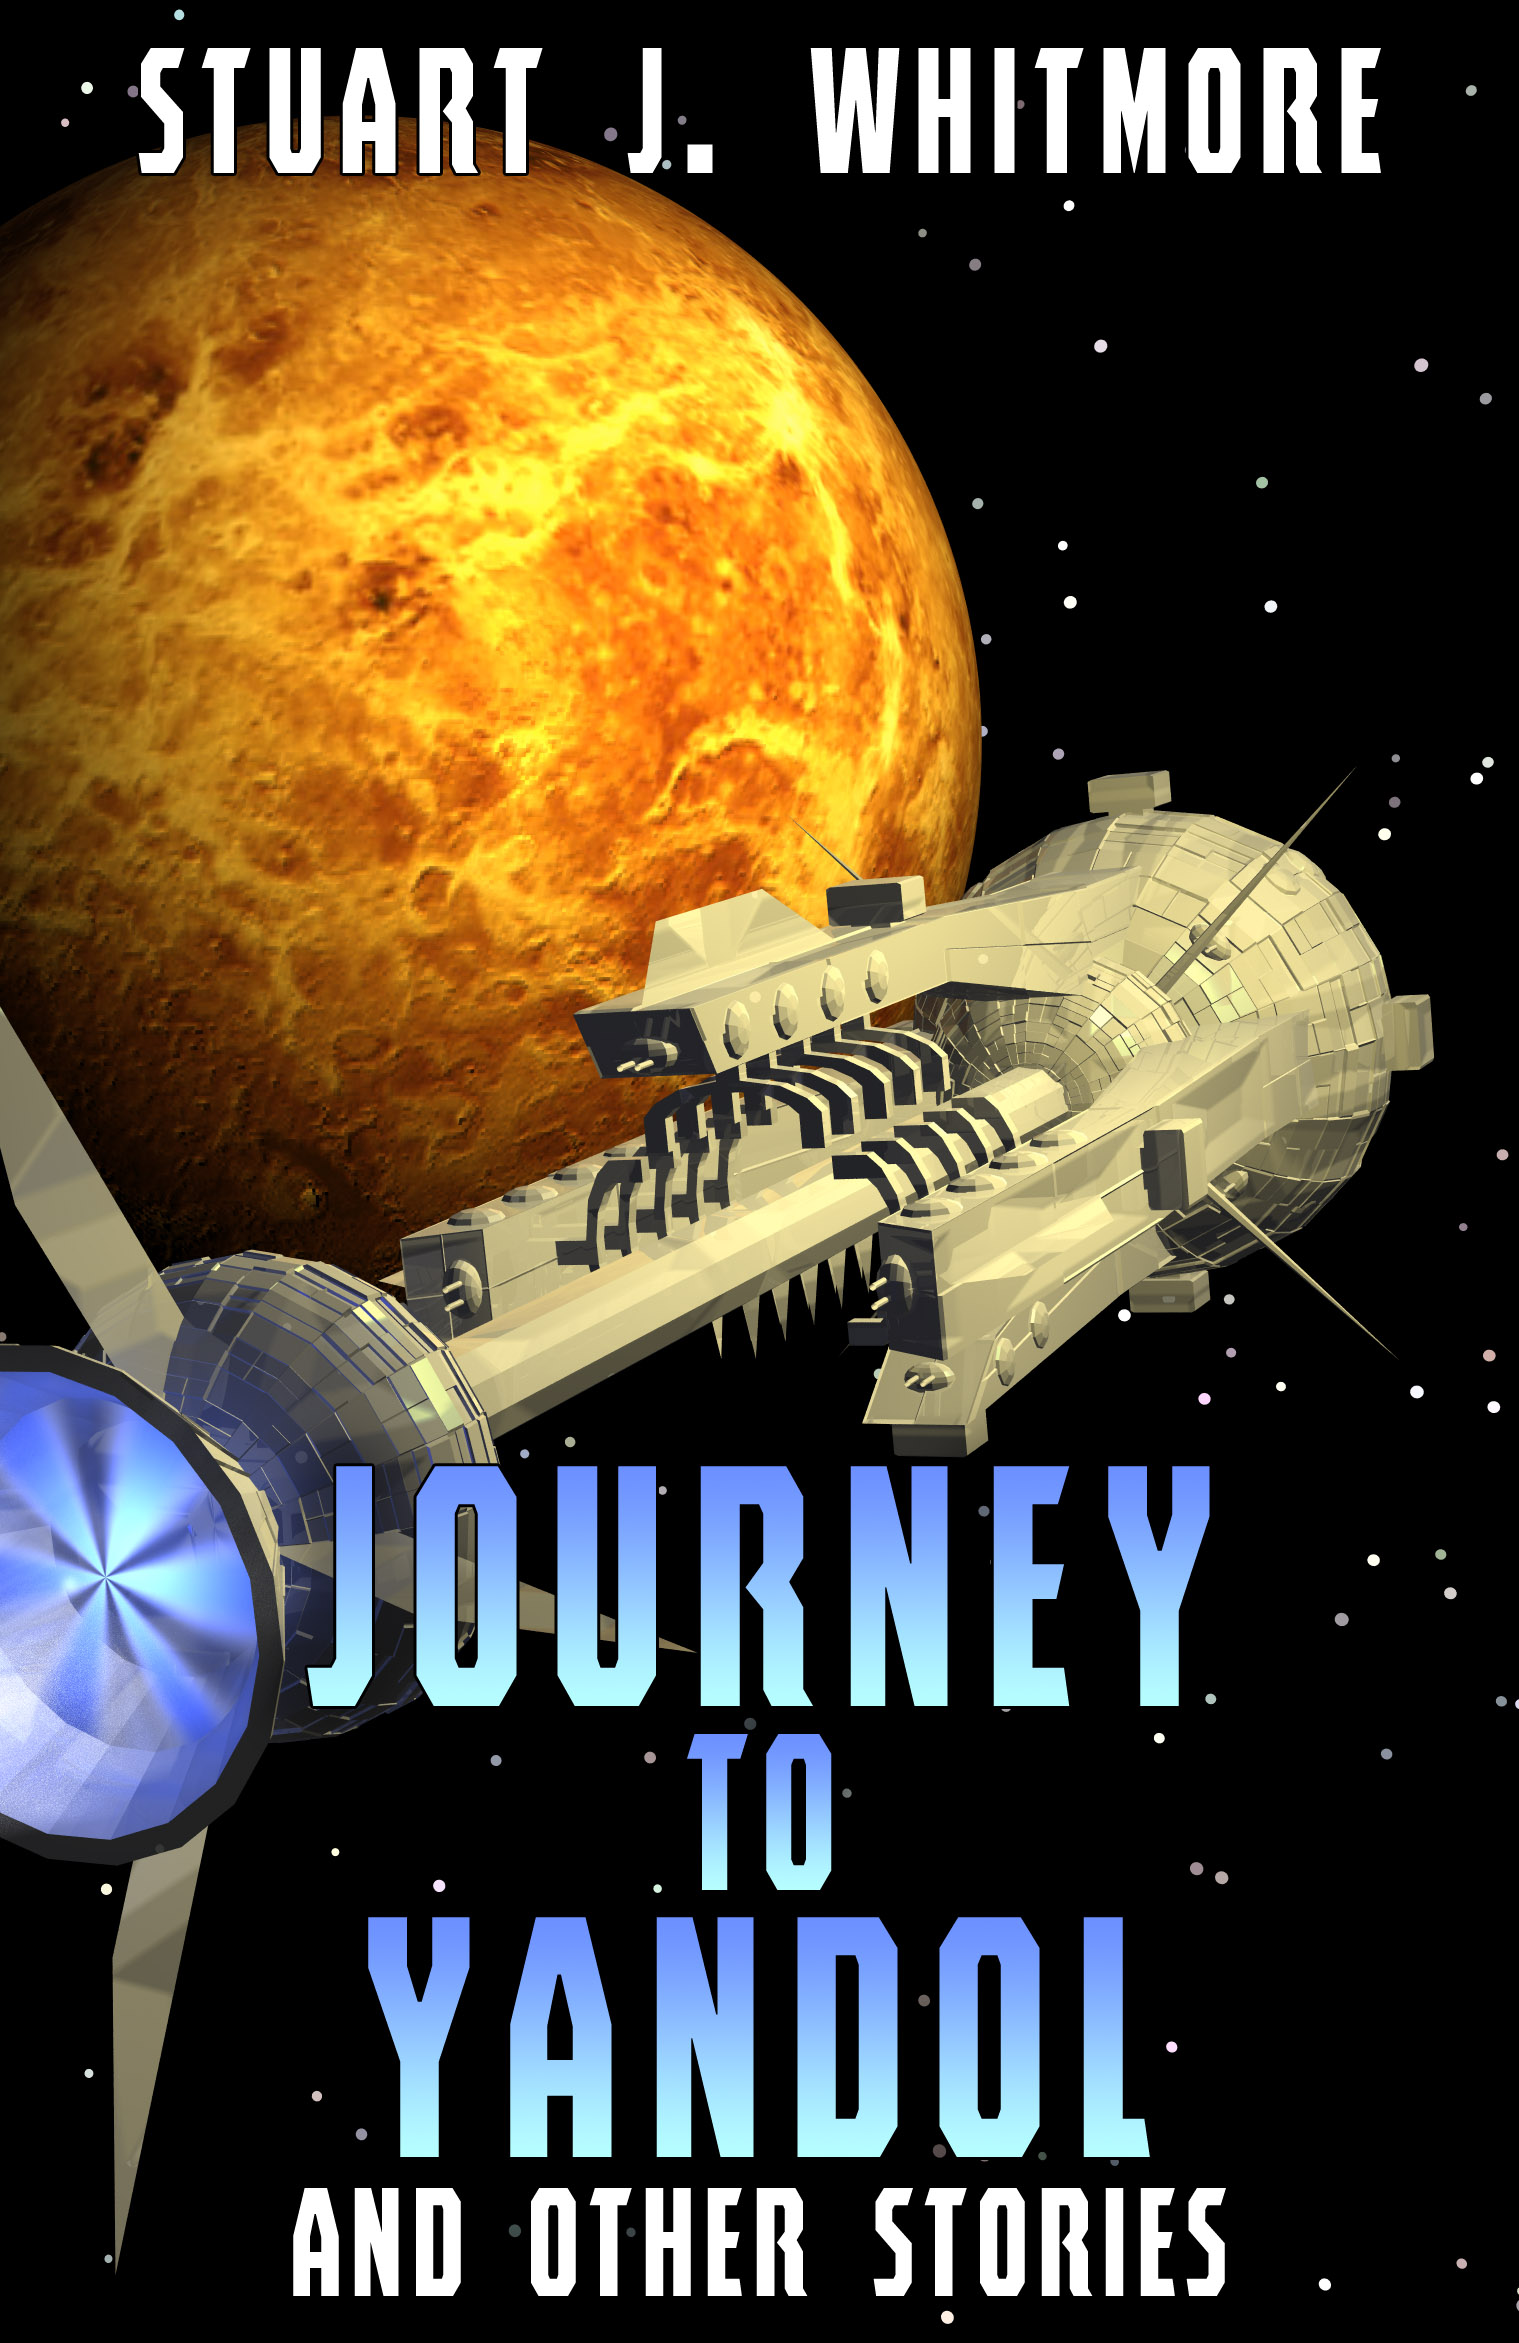 Stuart J. Whitmore: Journey to Yandol, and other stories (EBook)